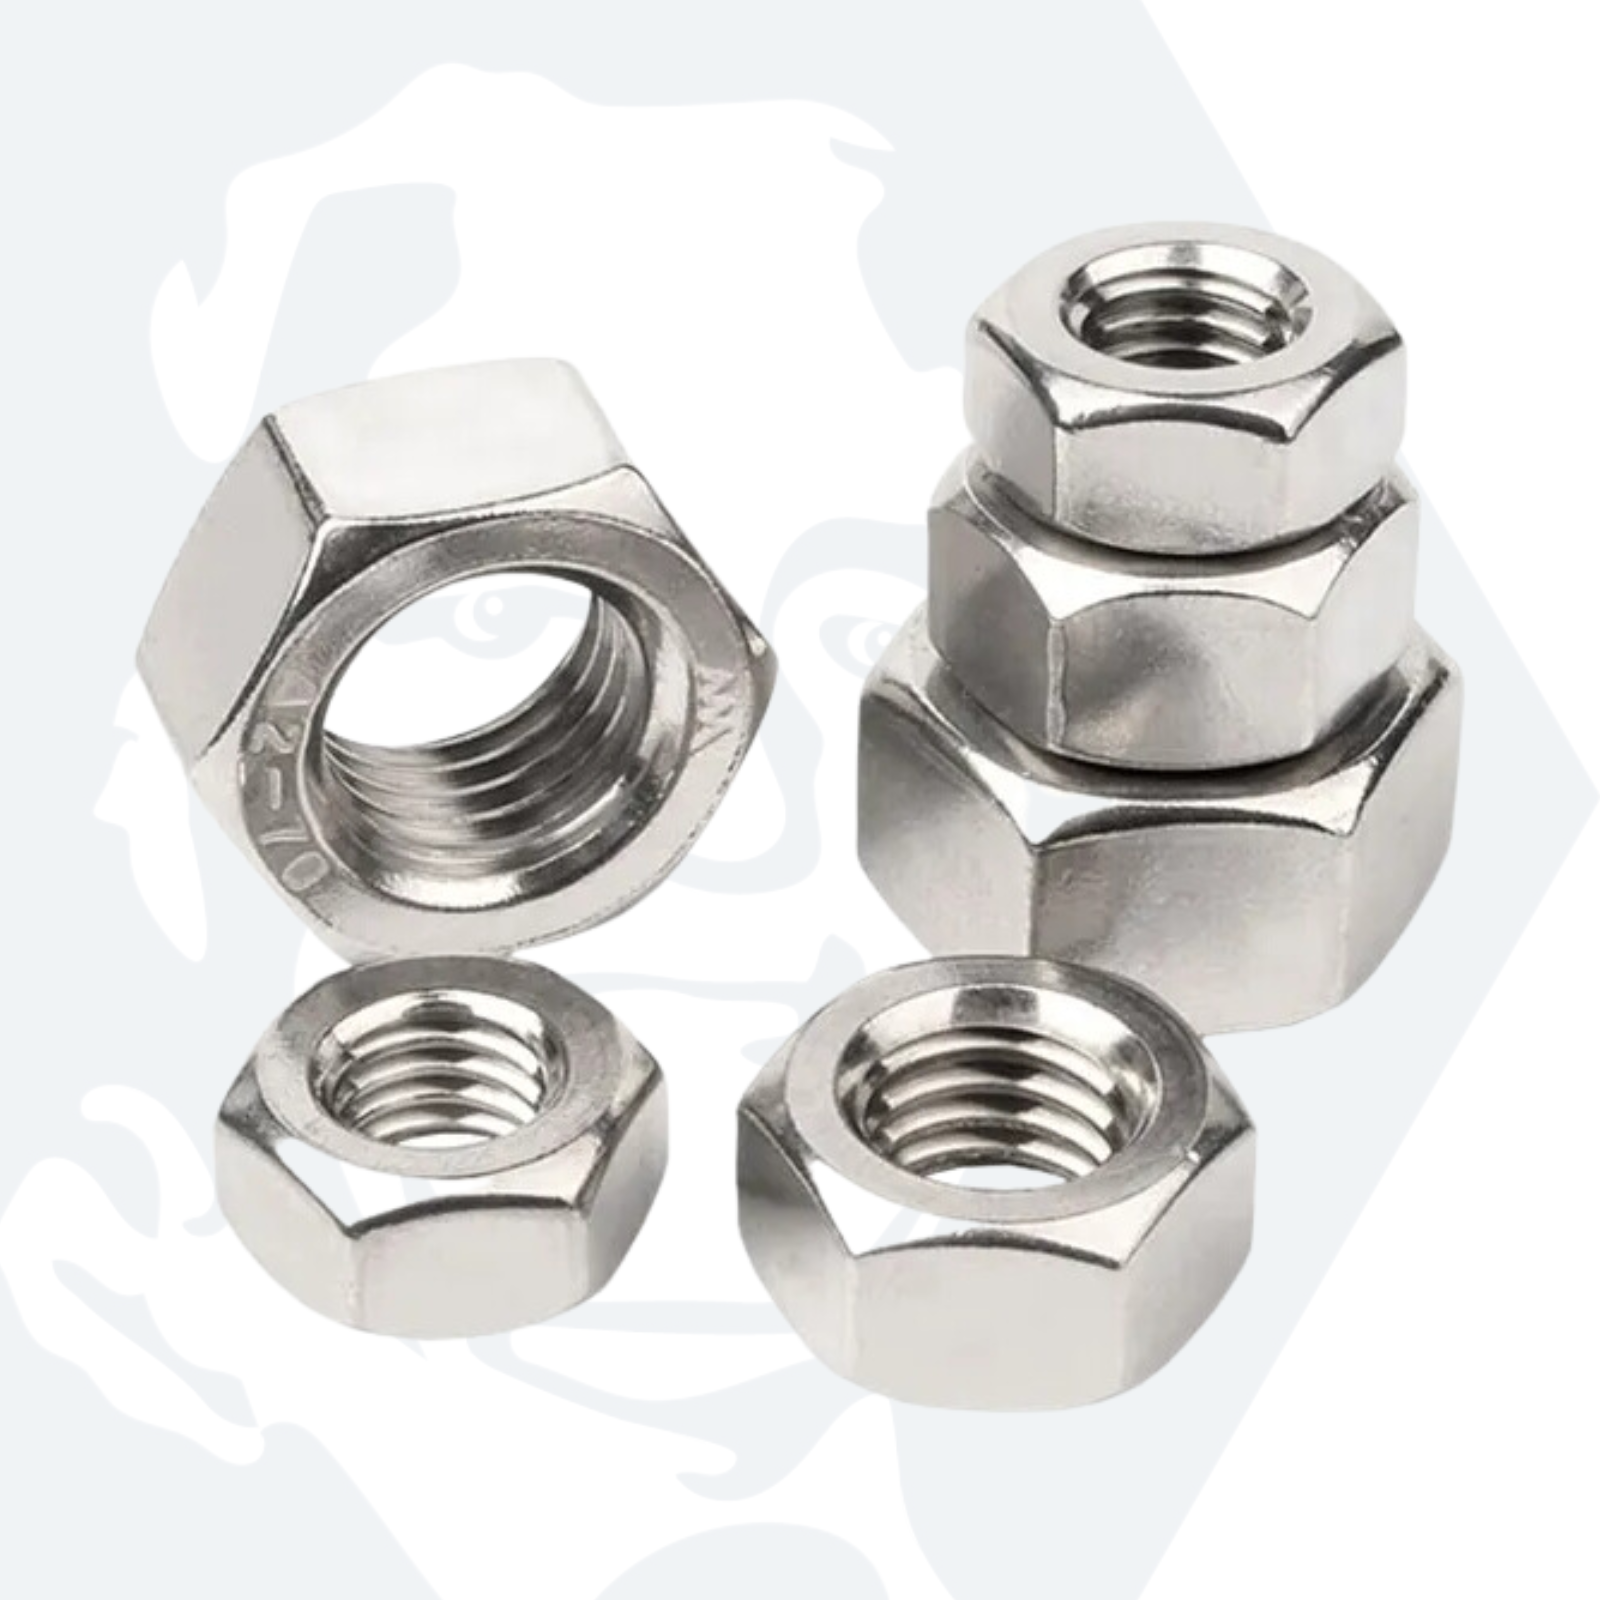 M3 Hexagon Nuts (DIN 934) - Stainless Steel (A2)